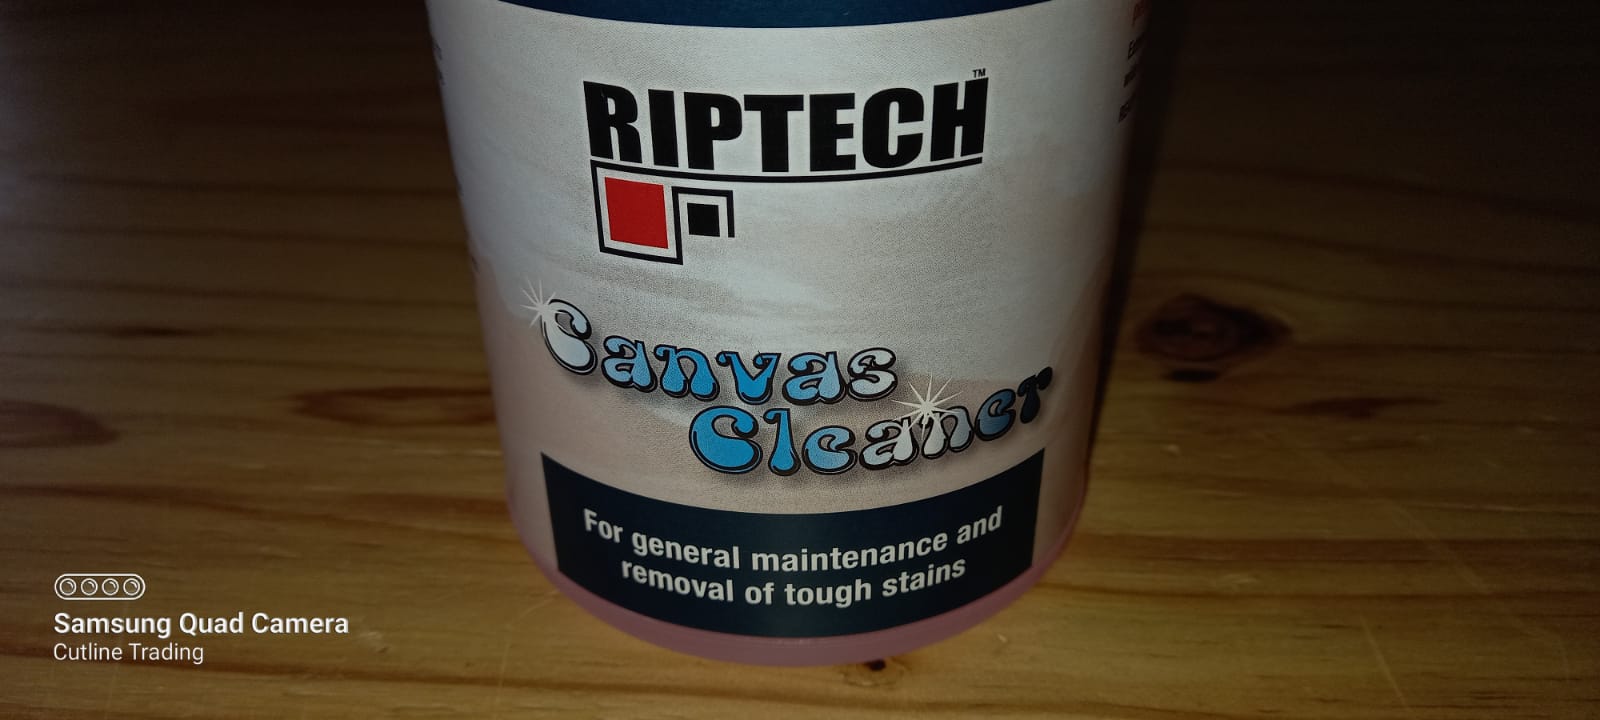 Riptech Canvas Cleaner